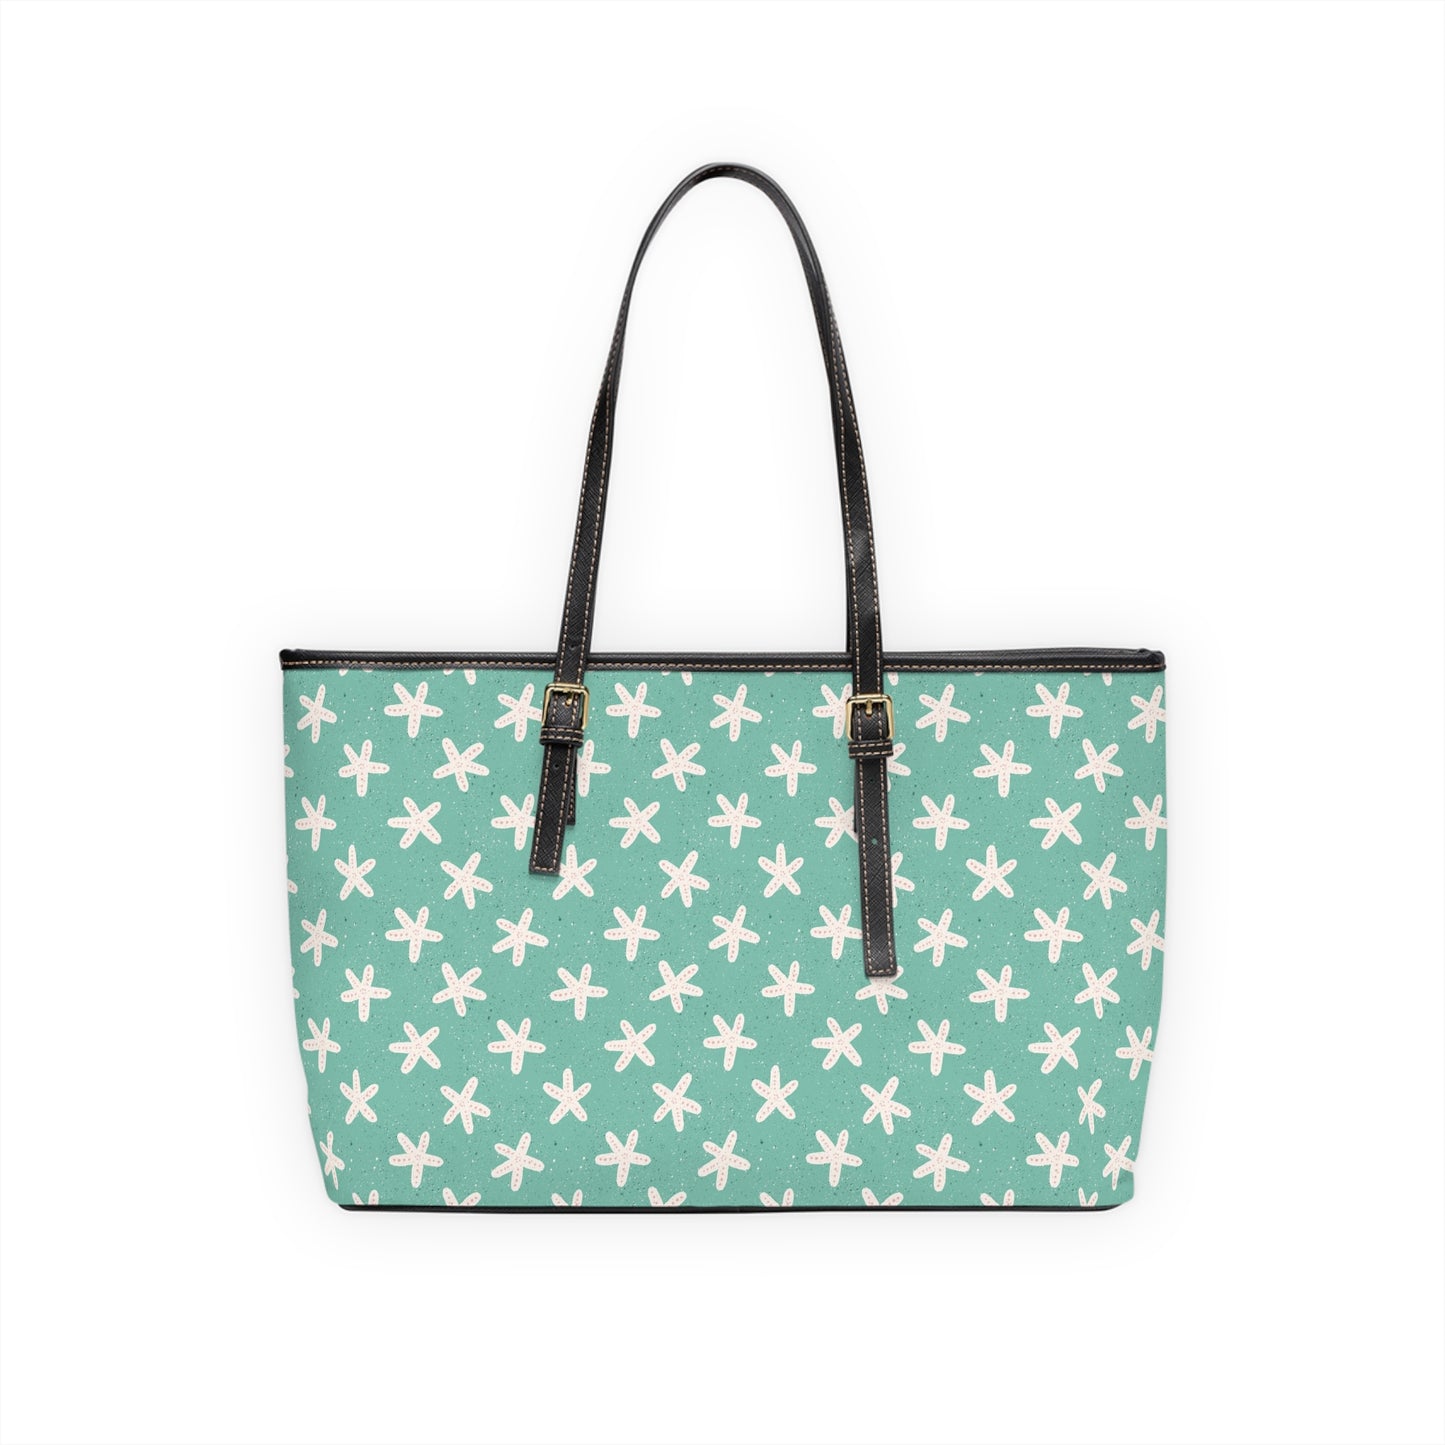 Starfish on Sea Green Faux Leather Shoulder Bag